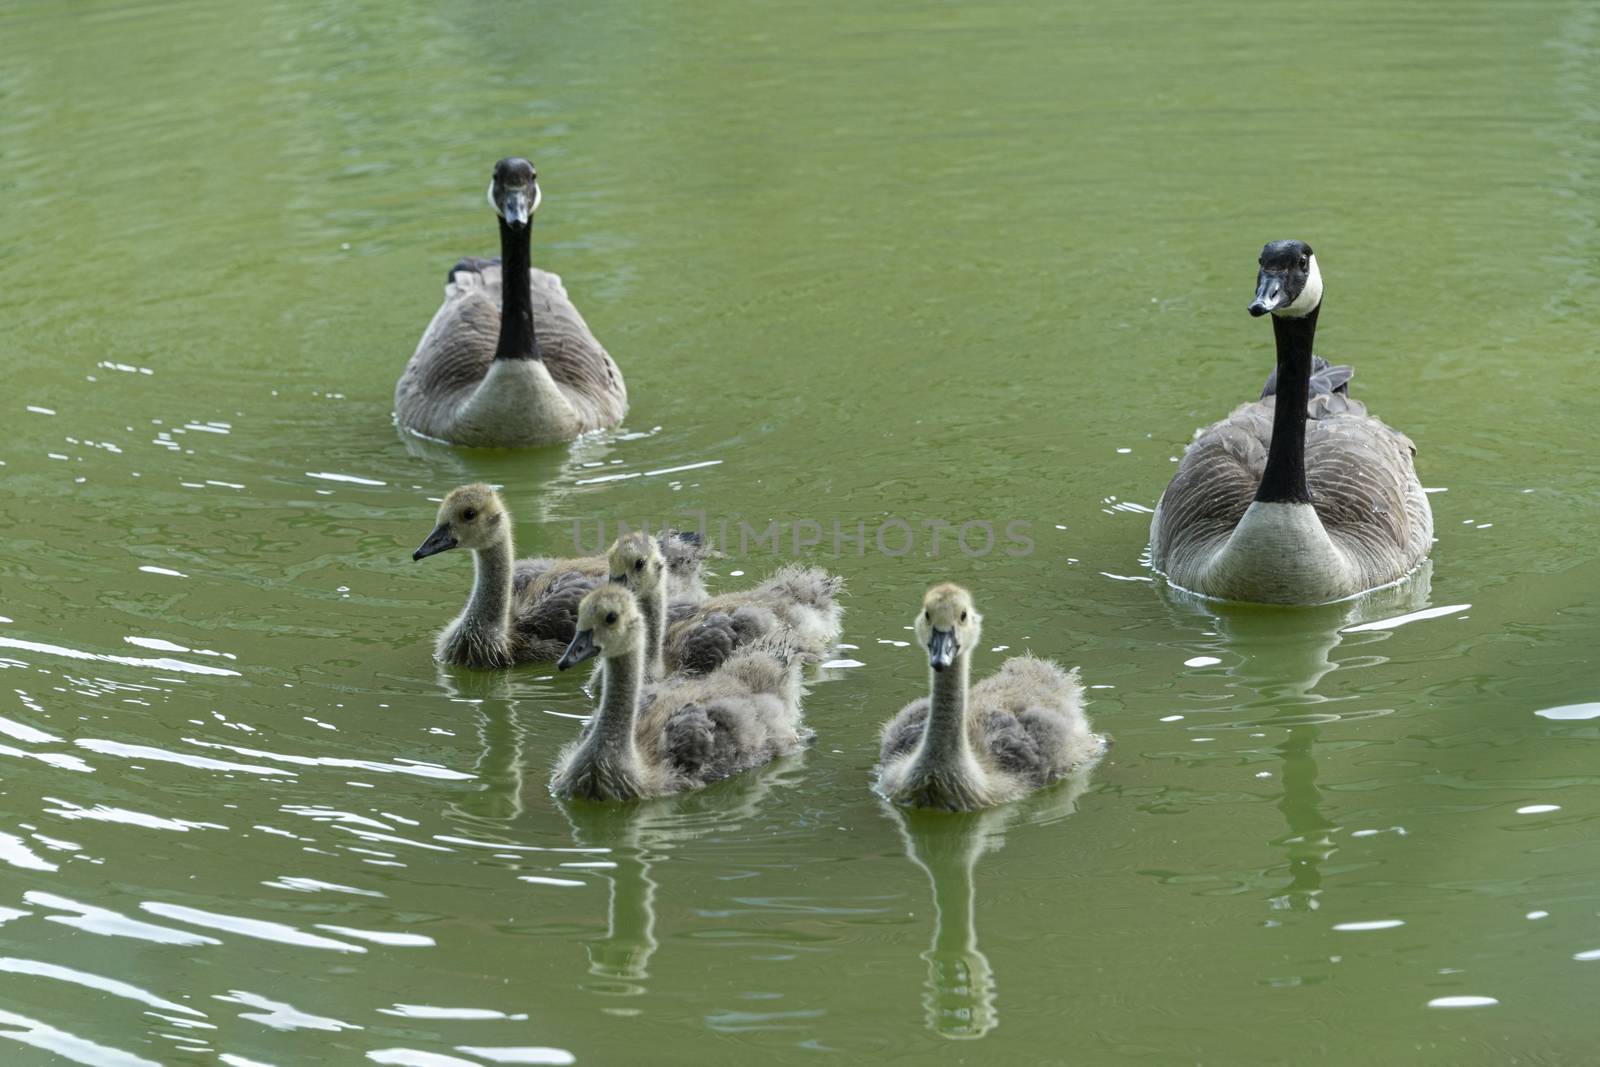 4 ducklings and their parents by mrs_vision